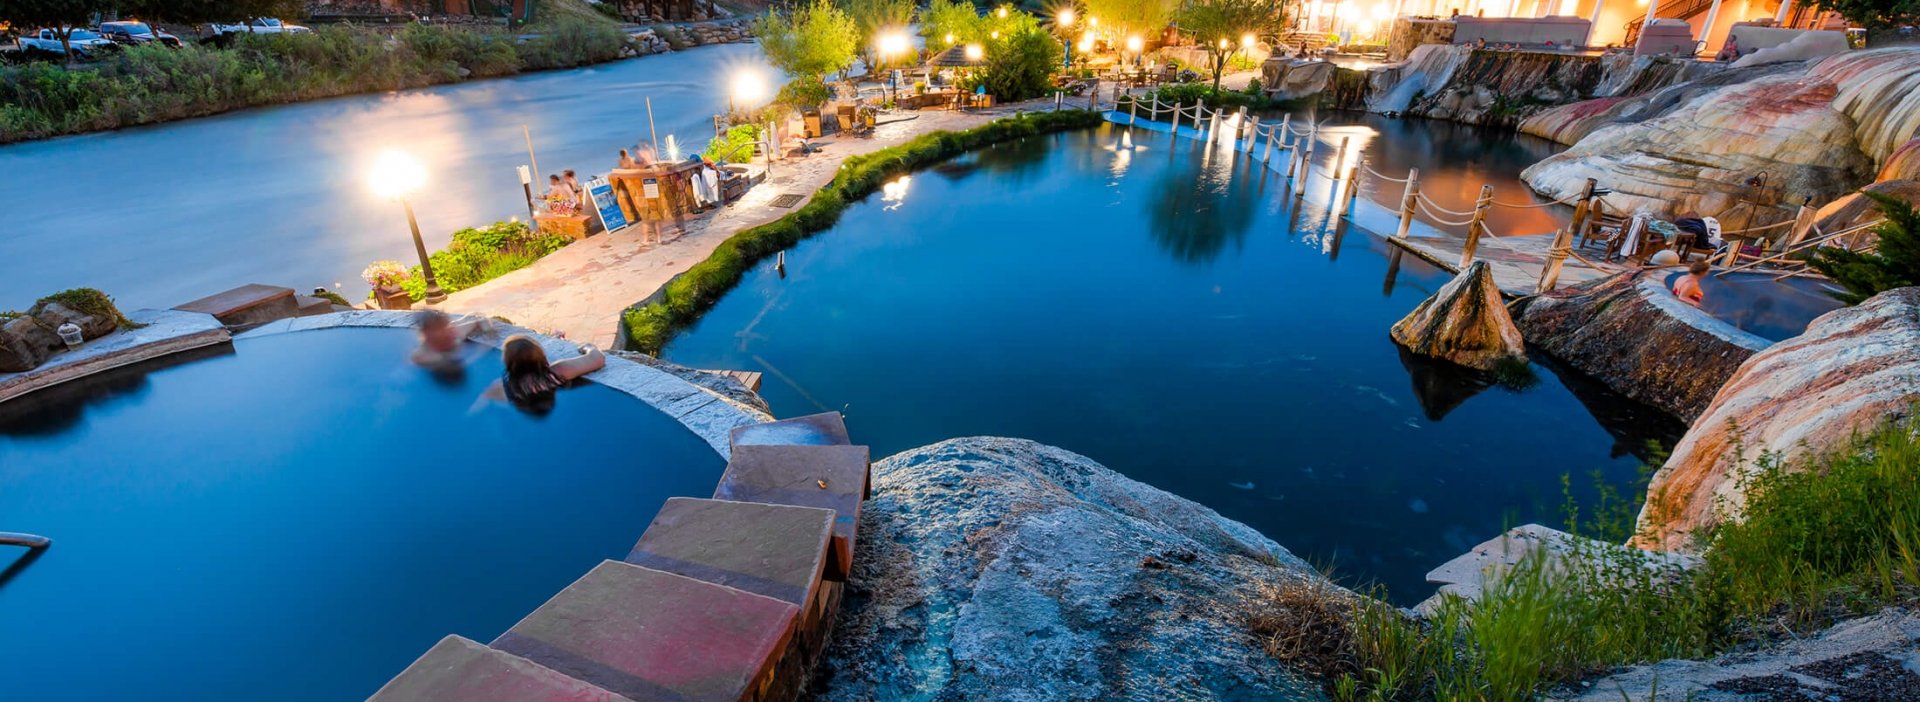 General FAQs The Springs Resort Pagosa Springs, CO image photo